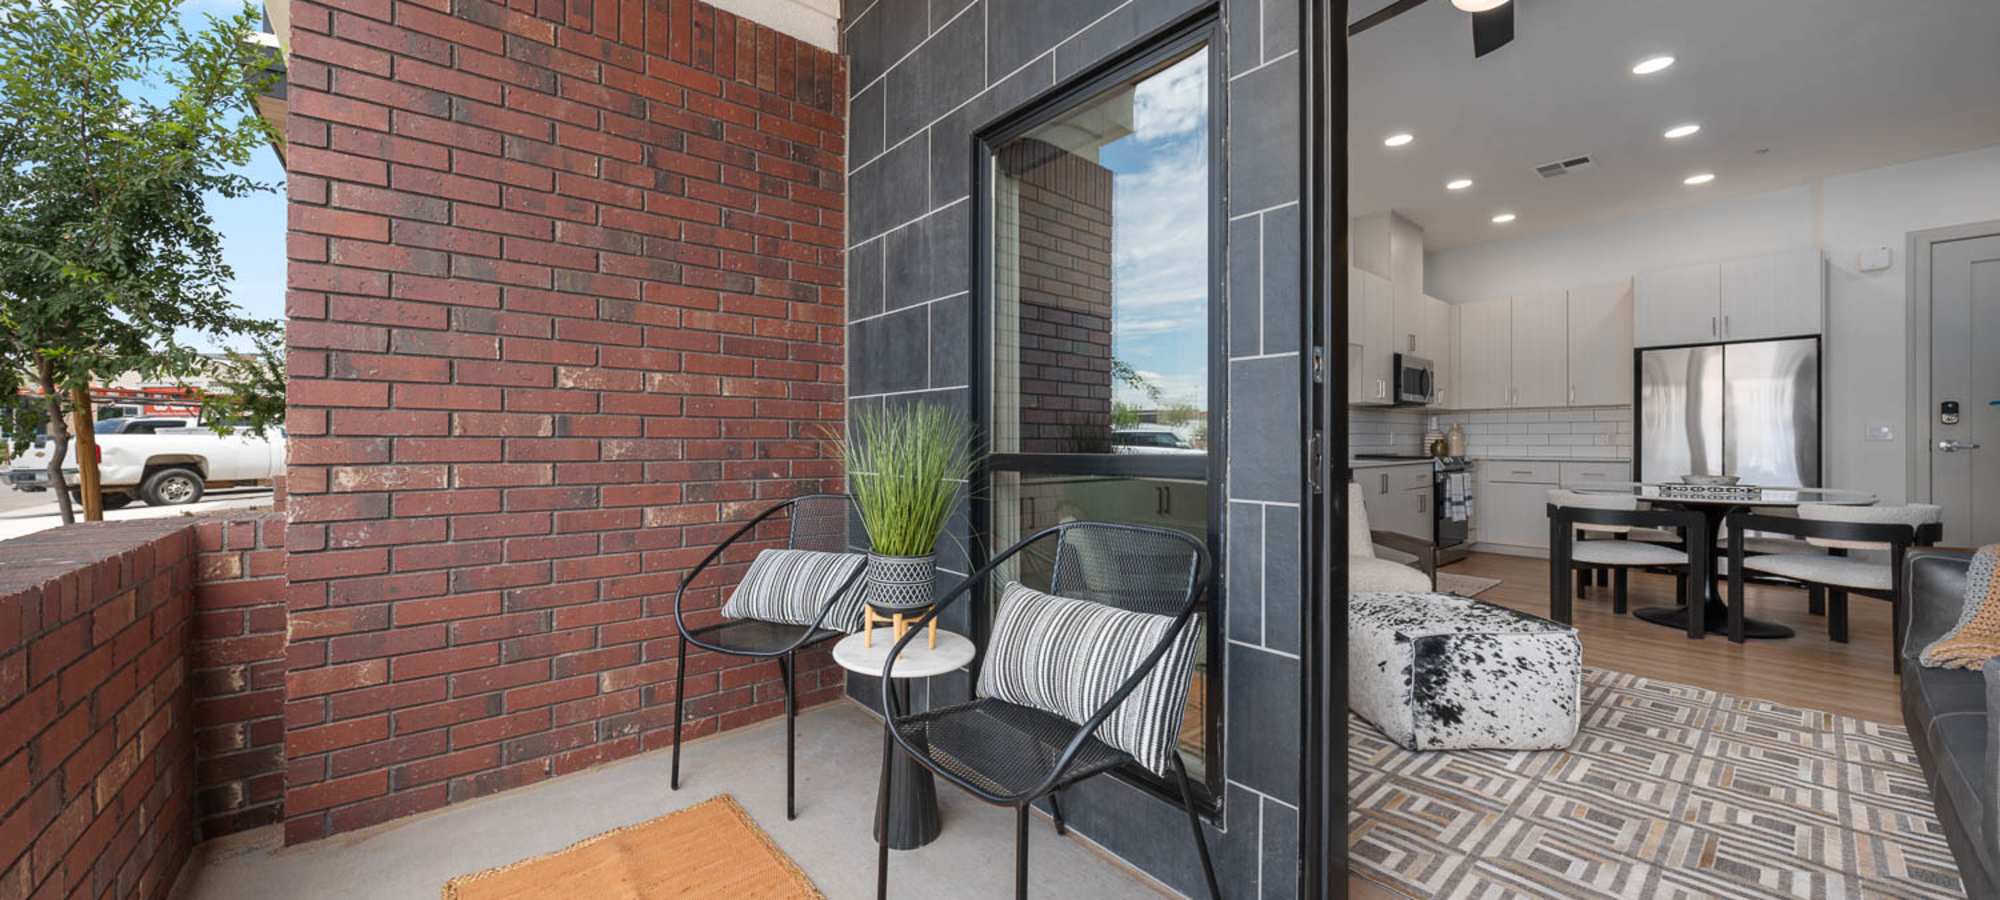 Private Patio / Balcony with Storage at Quintana at Cooley Station in Gilbert, Arizona